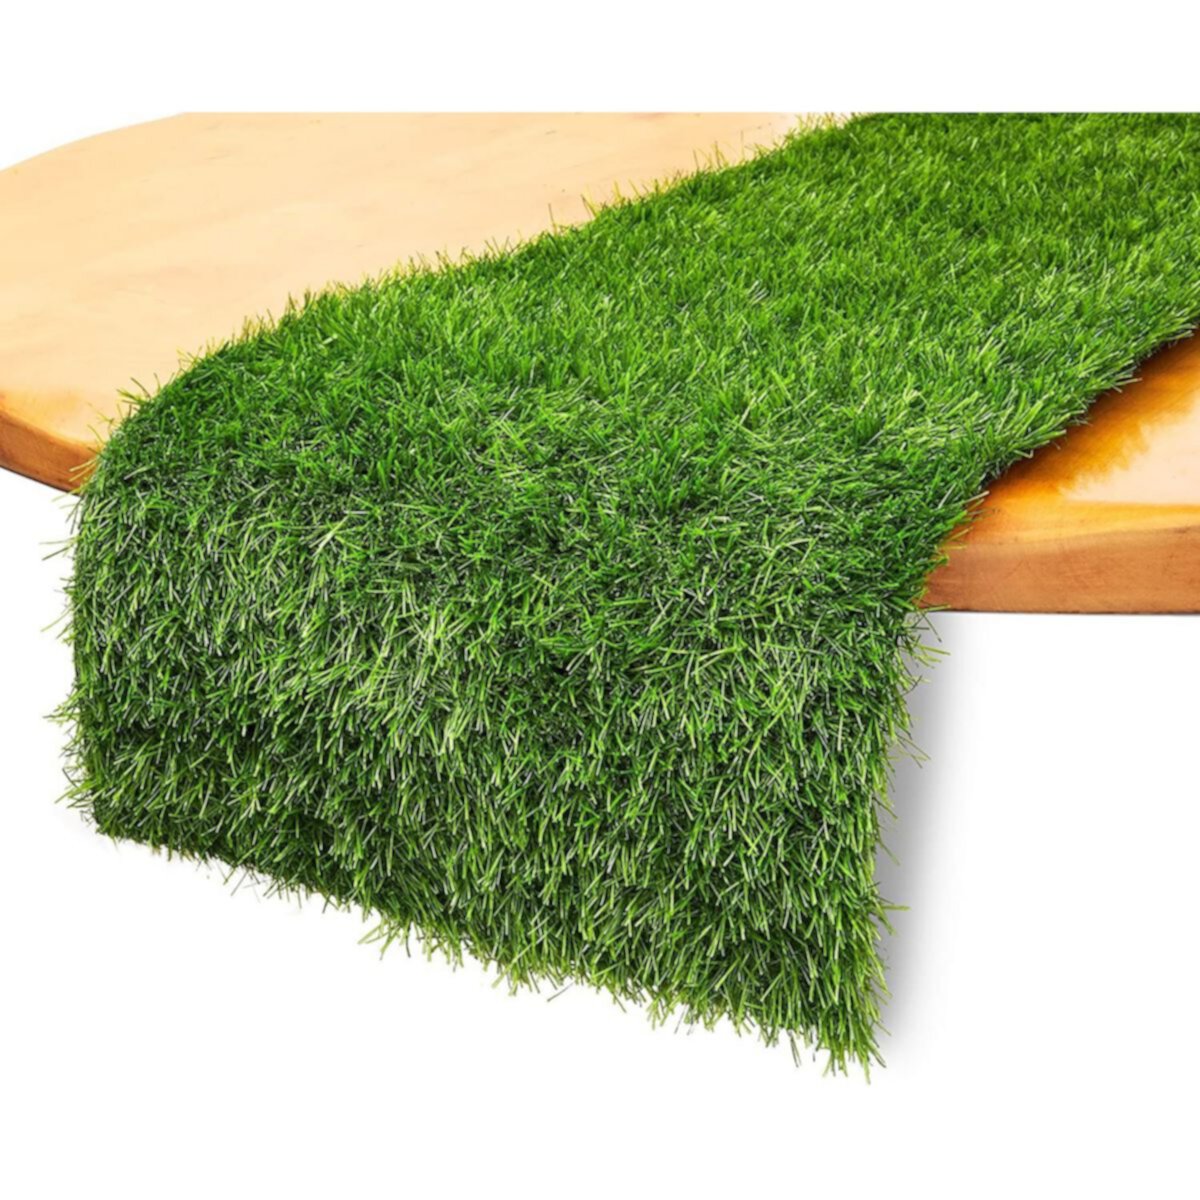 Juvale 6 Foot Synthetic Grass Table Runner for Party Decor (14 x 72 Inches) Juvale